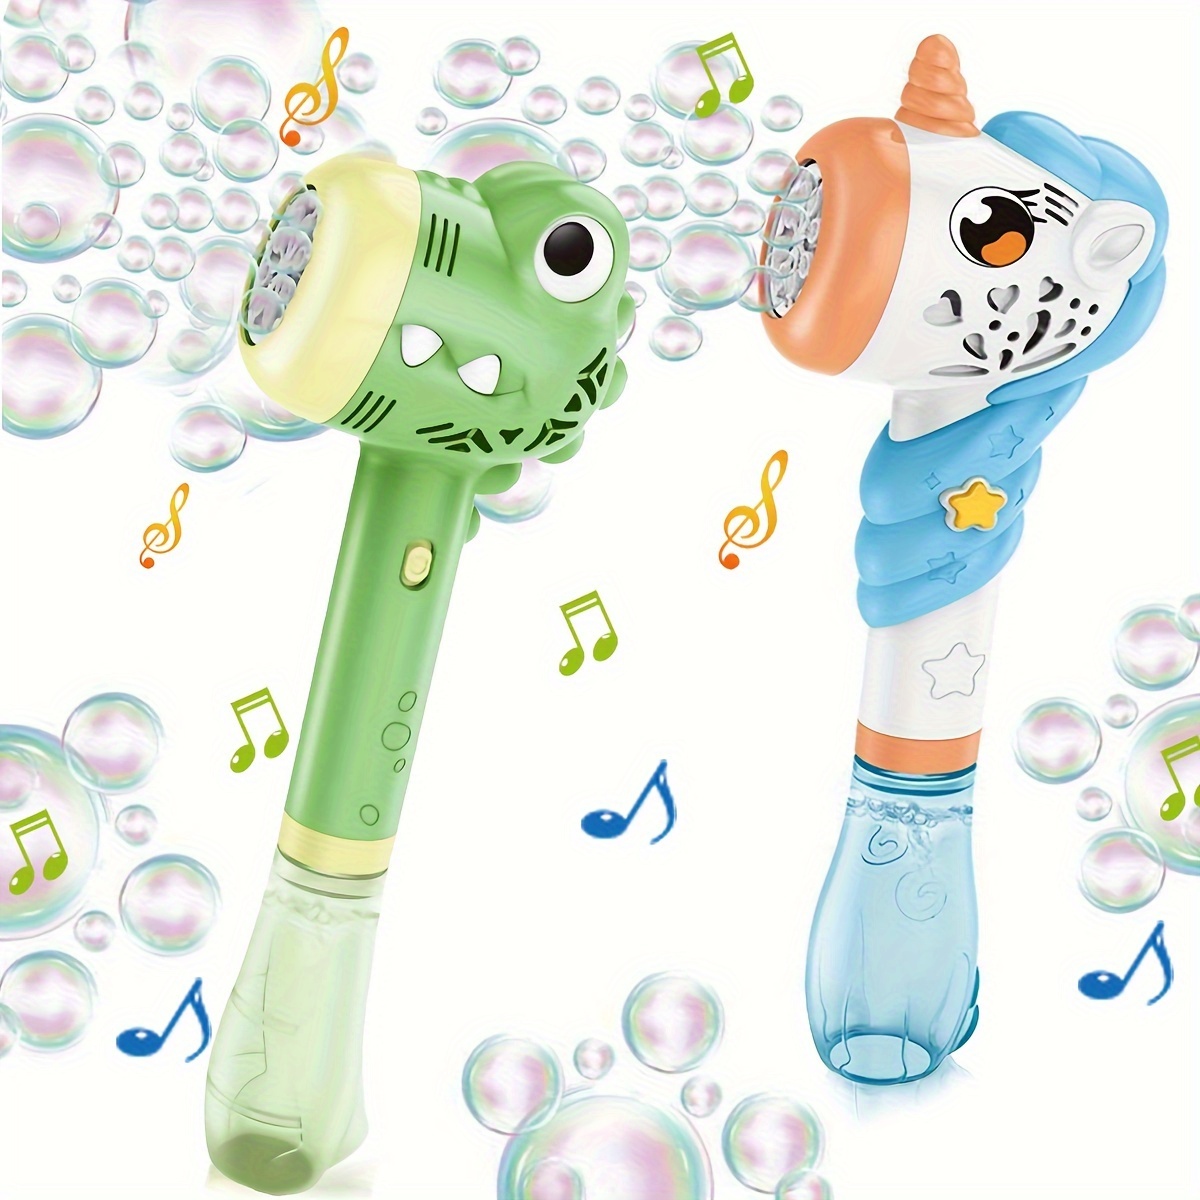 

Bubble Machine Outdoor Toys Perfect As A Gift For Party Favors Birthdays Valentine Halloween Christmas Bubble Wand For Easy Outdoor Use (bubble Liquid And Batteries Not Included)